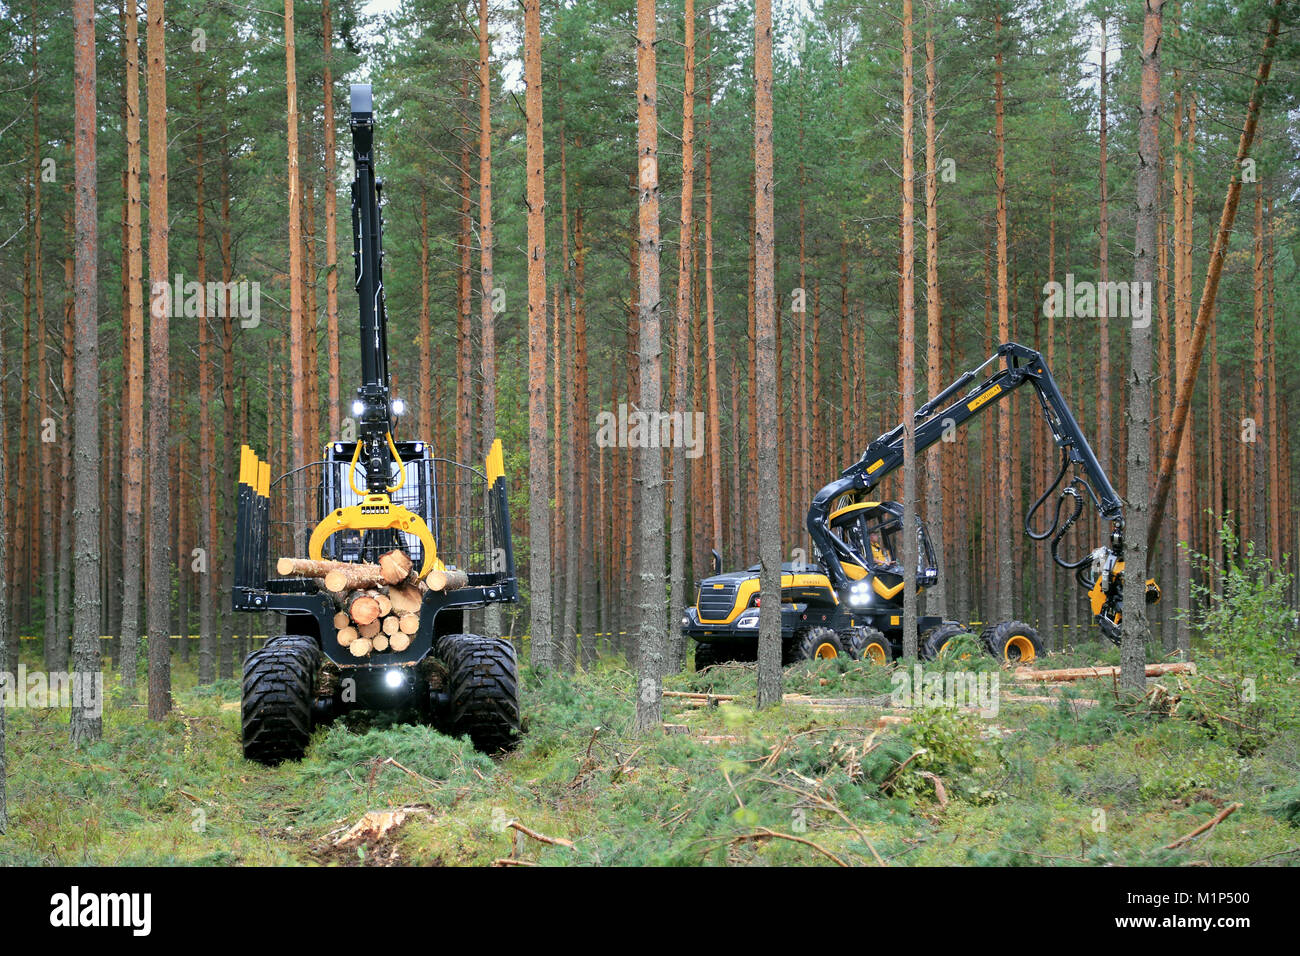 JAMSA, FINLAND - AUGUST 30, 2014: Ponsse forwarder Buffalo and harvester Scorpion in a work demo. Ponsse presents its new Model Series 2015 at FinnMET Stock Photo